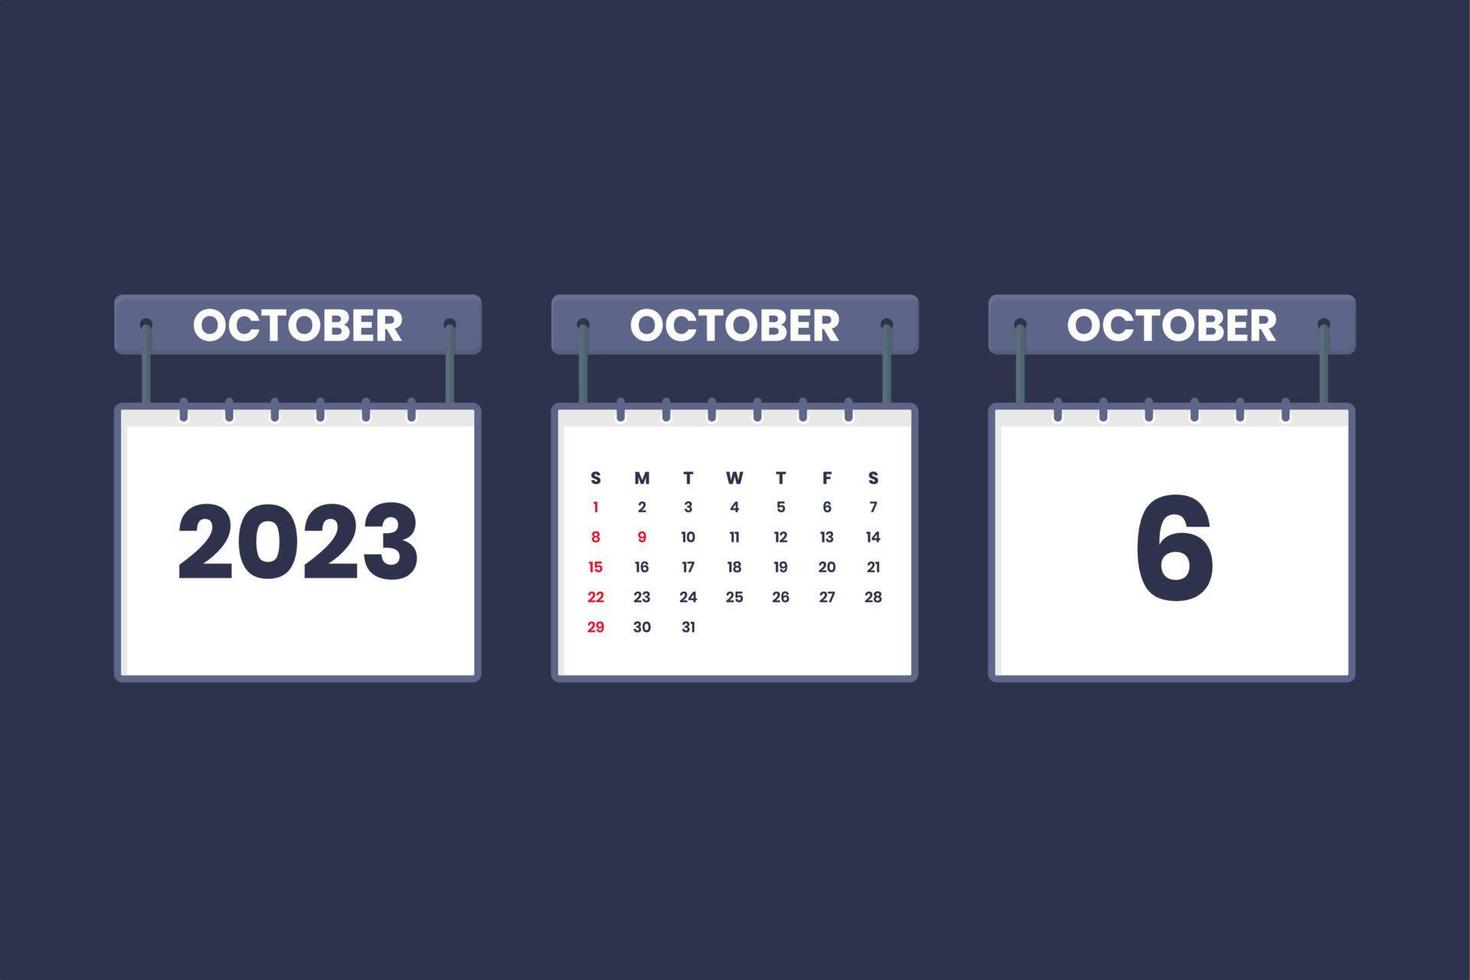 6 October 2023 calendar icon for schedule, appointment, important date concept vector